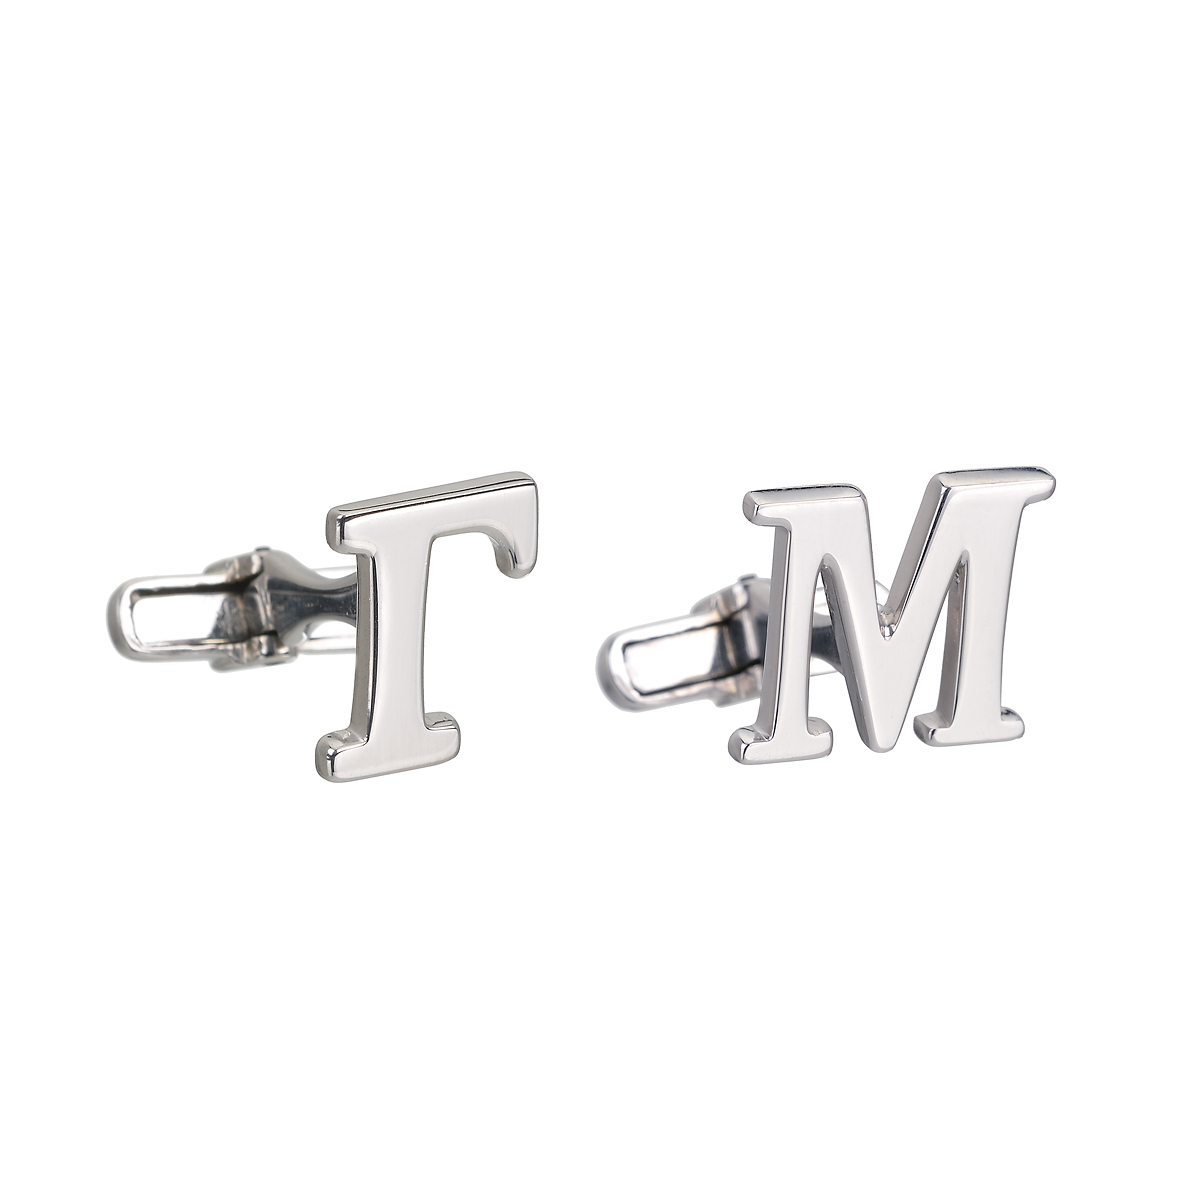 SILVER CUFFLINKS WITH INITIALS "Γ M"